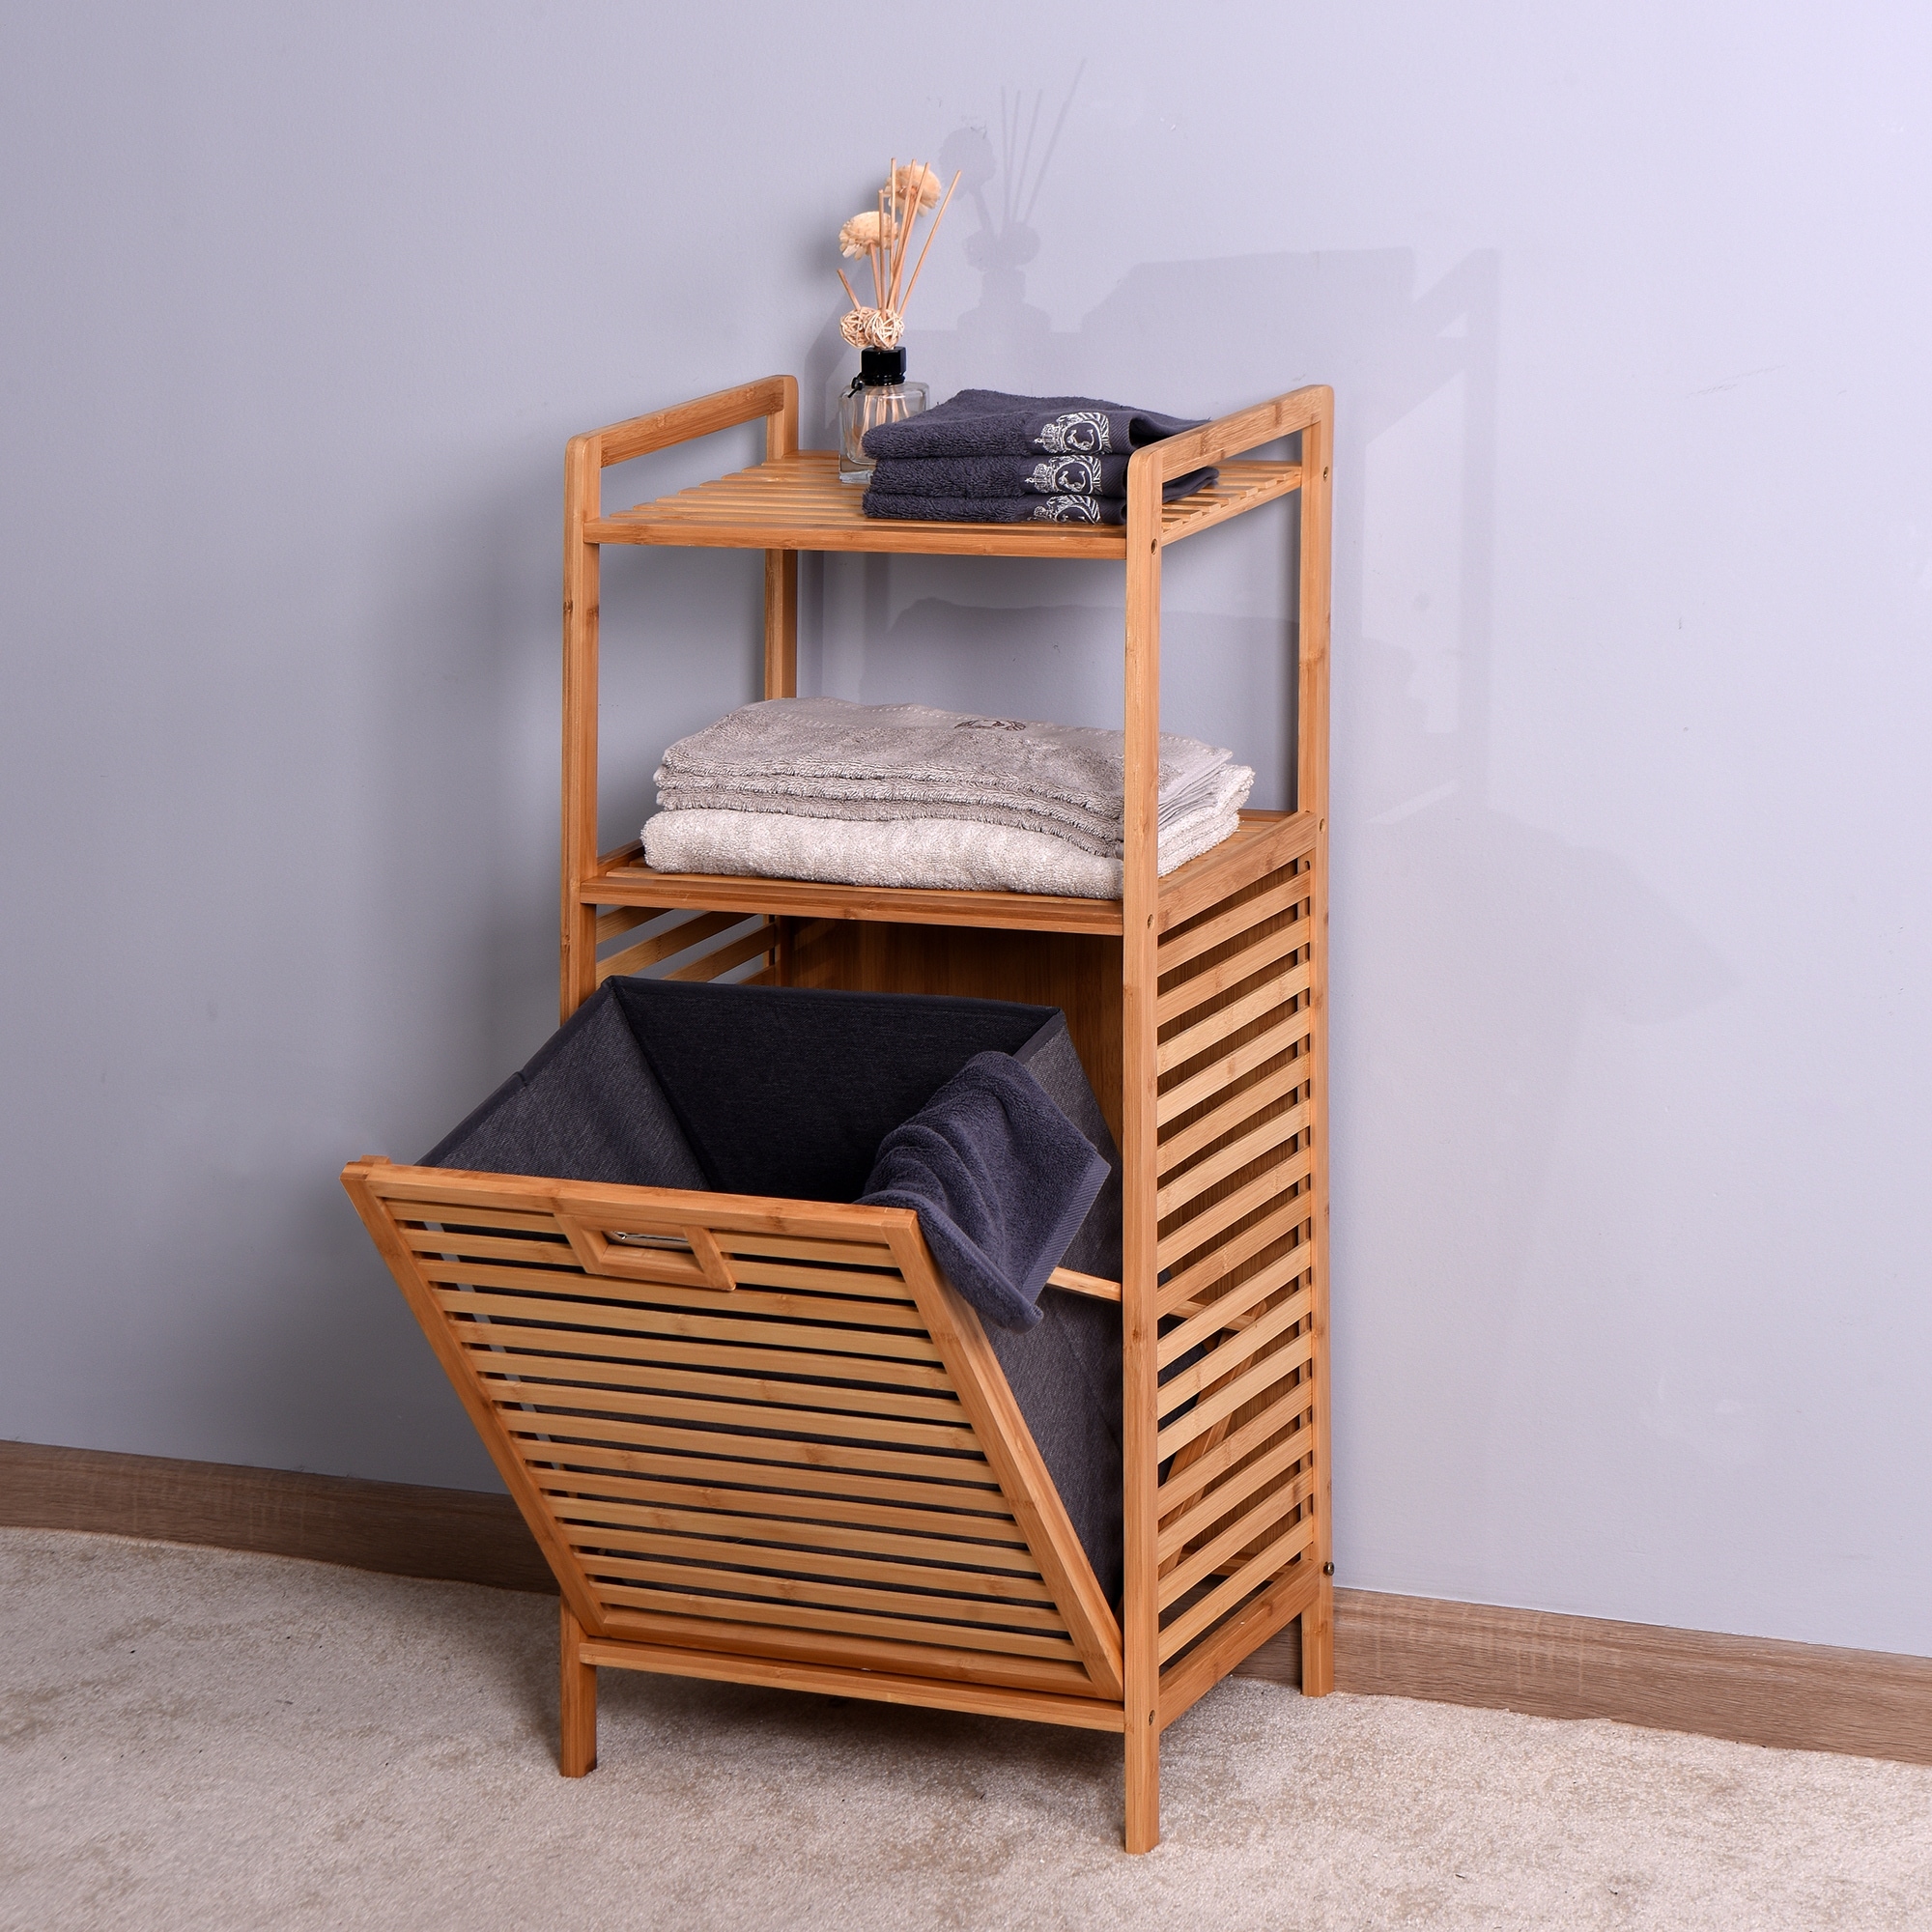 https://ak1.ostkcdn.com/images/products/is/images/direct/f32bff2406259be613207fec9e9023384382965e/Bathroom-Laundry-Basket-Bamboo-Storage-Basket-with-2-Tier-Shelf.jpg